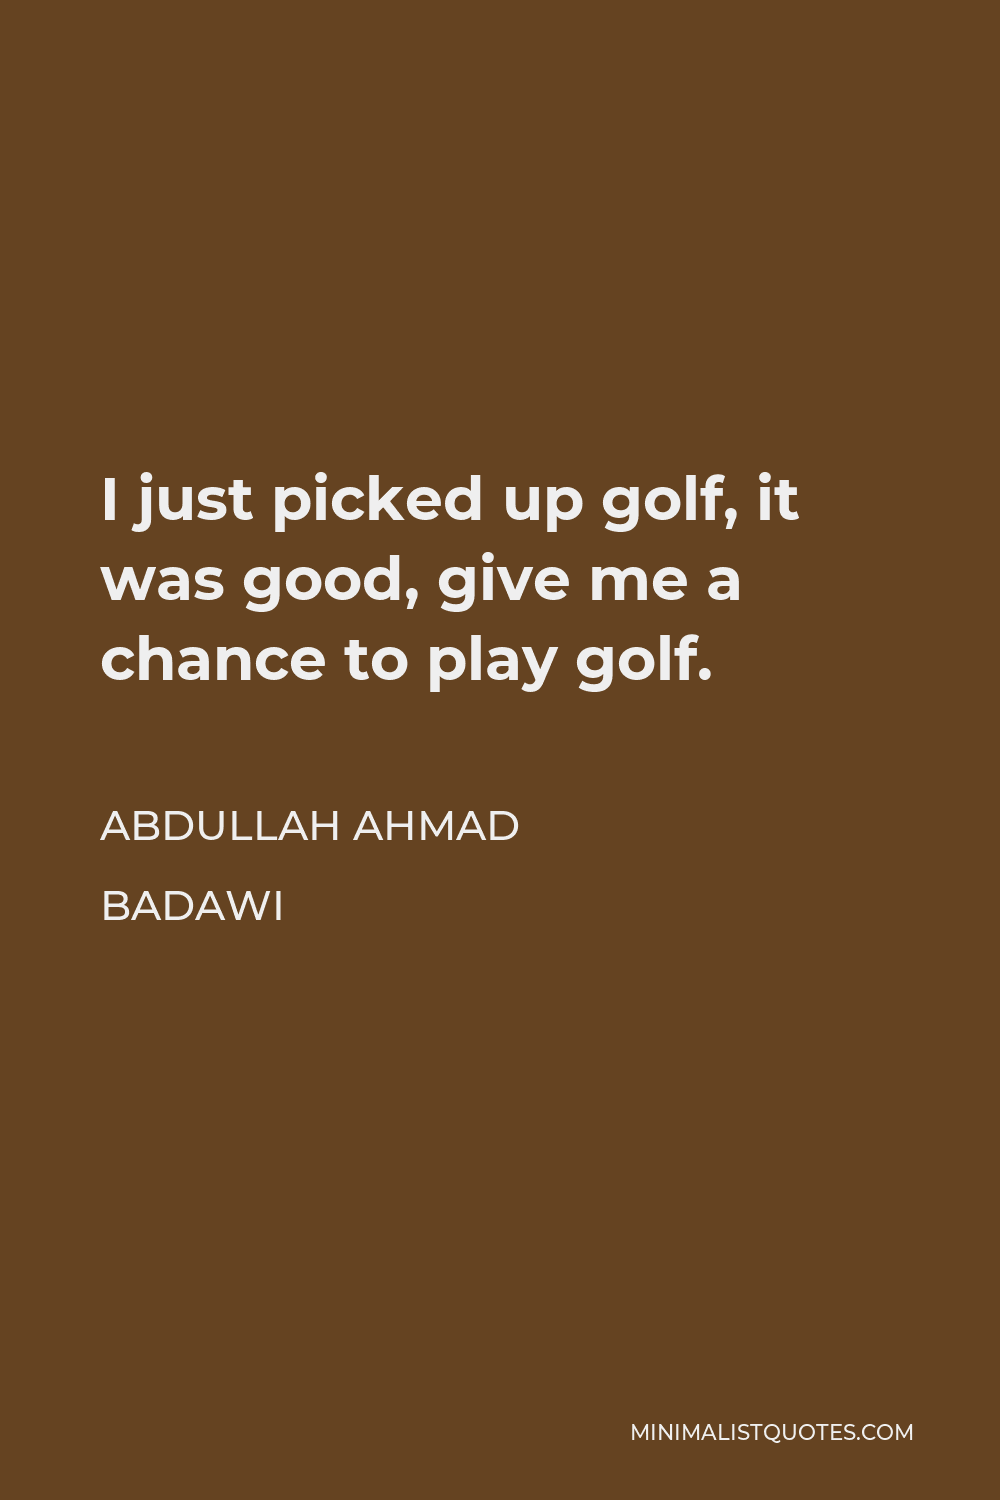 Abdullah Ahmad Badawi Quote - I just picked up golf, it was good, give me a chance to play golf.